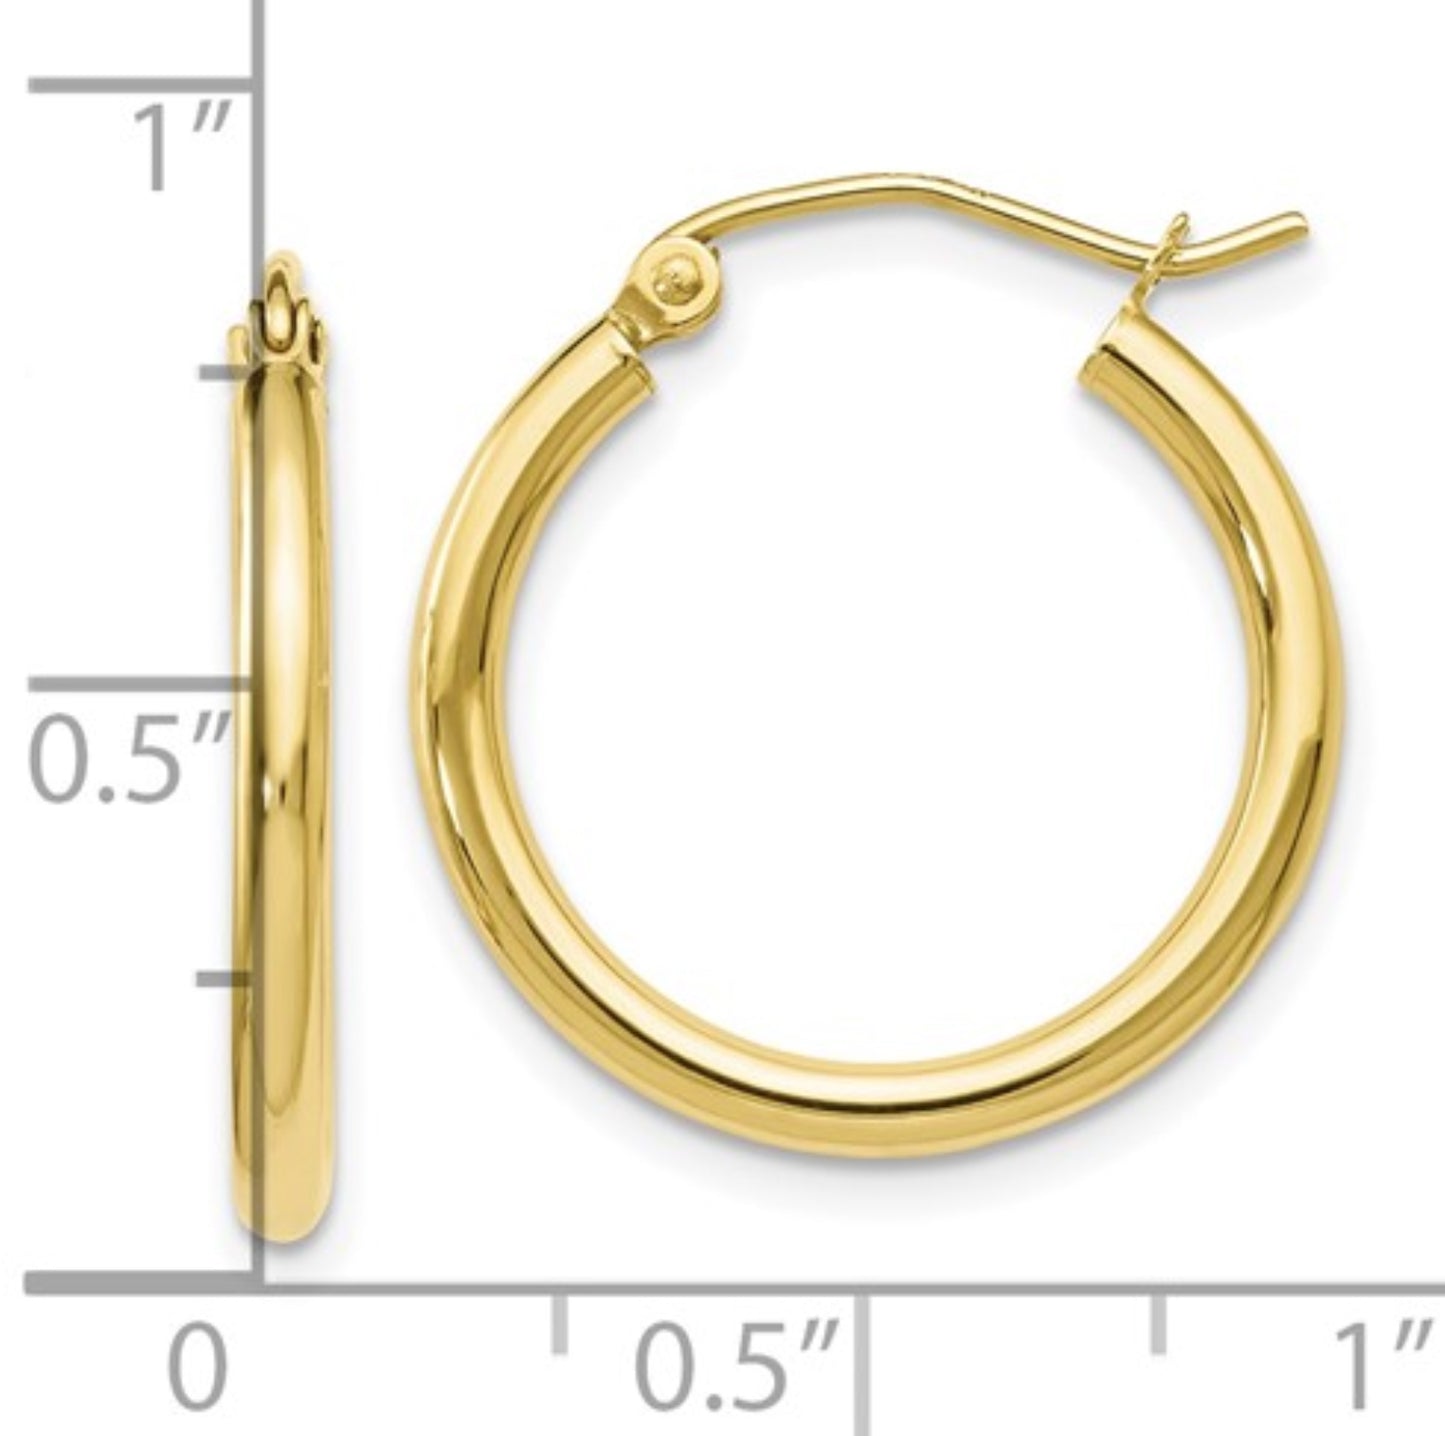 10K Yellow Gold Polished Hinged Hoop Earrings Small